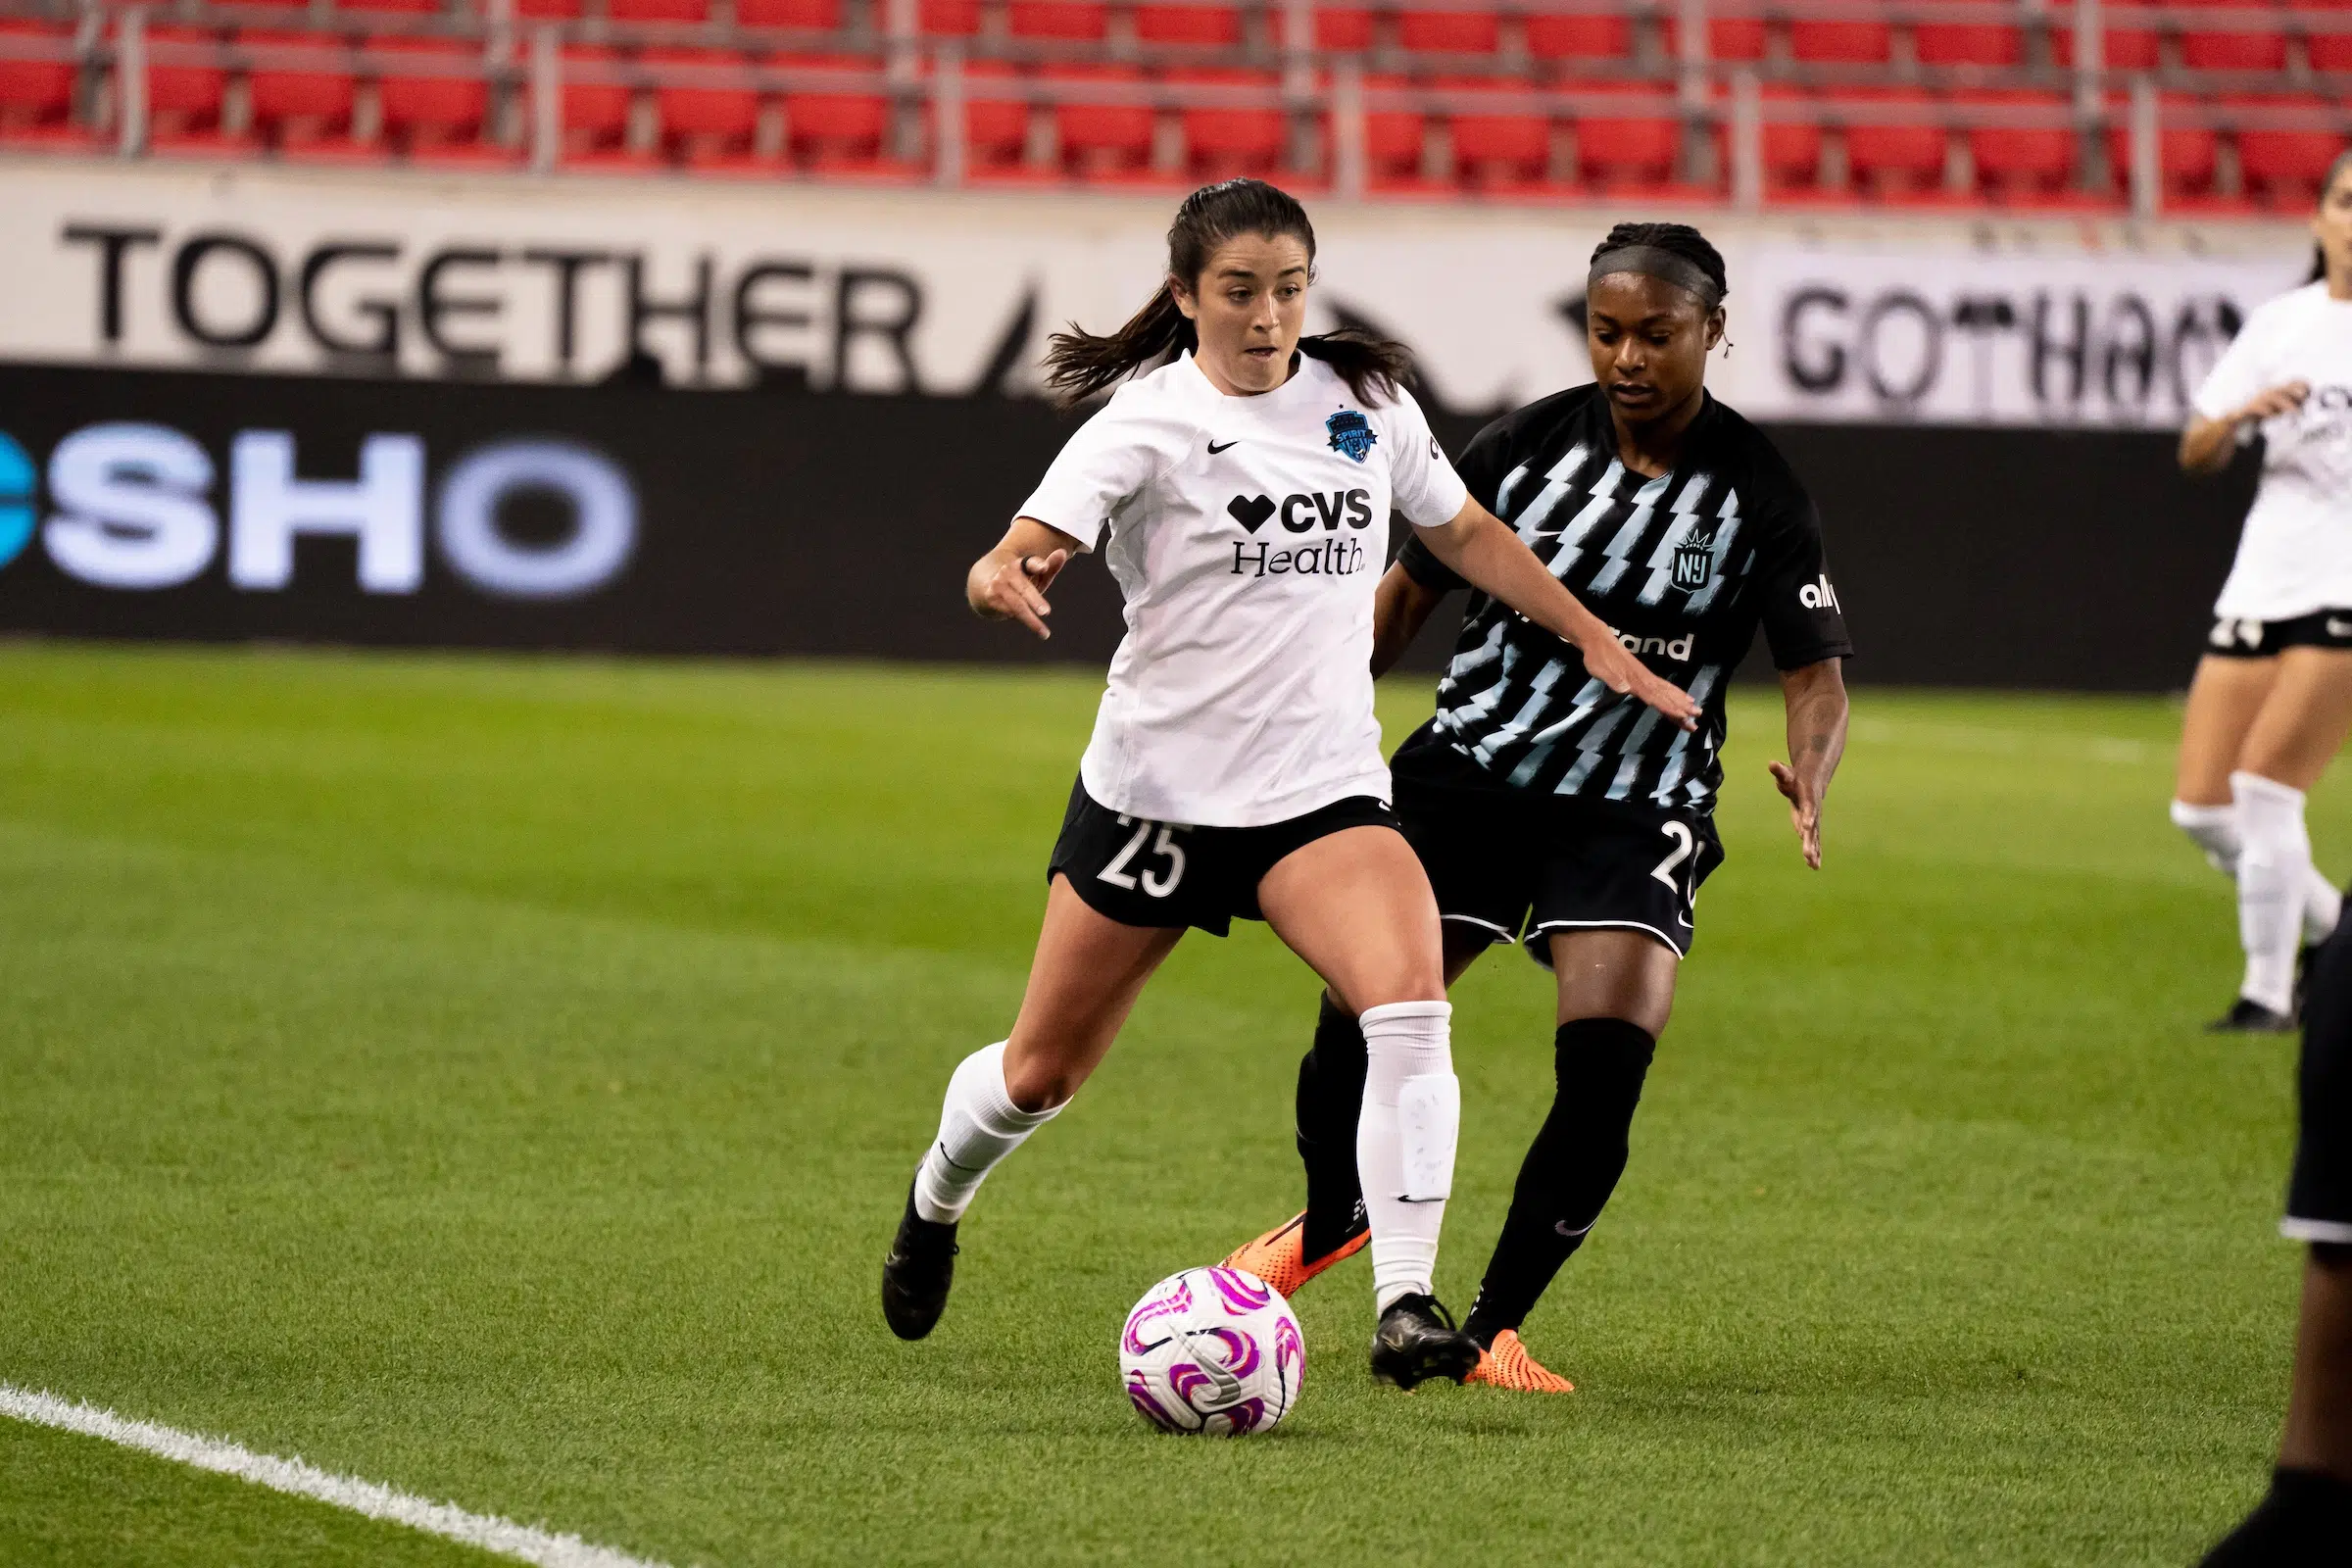 Marissa Sheva in a white top, black shorts and white socks dribbles a soccer ball as a defender in a black uniform chases her down.